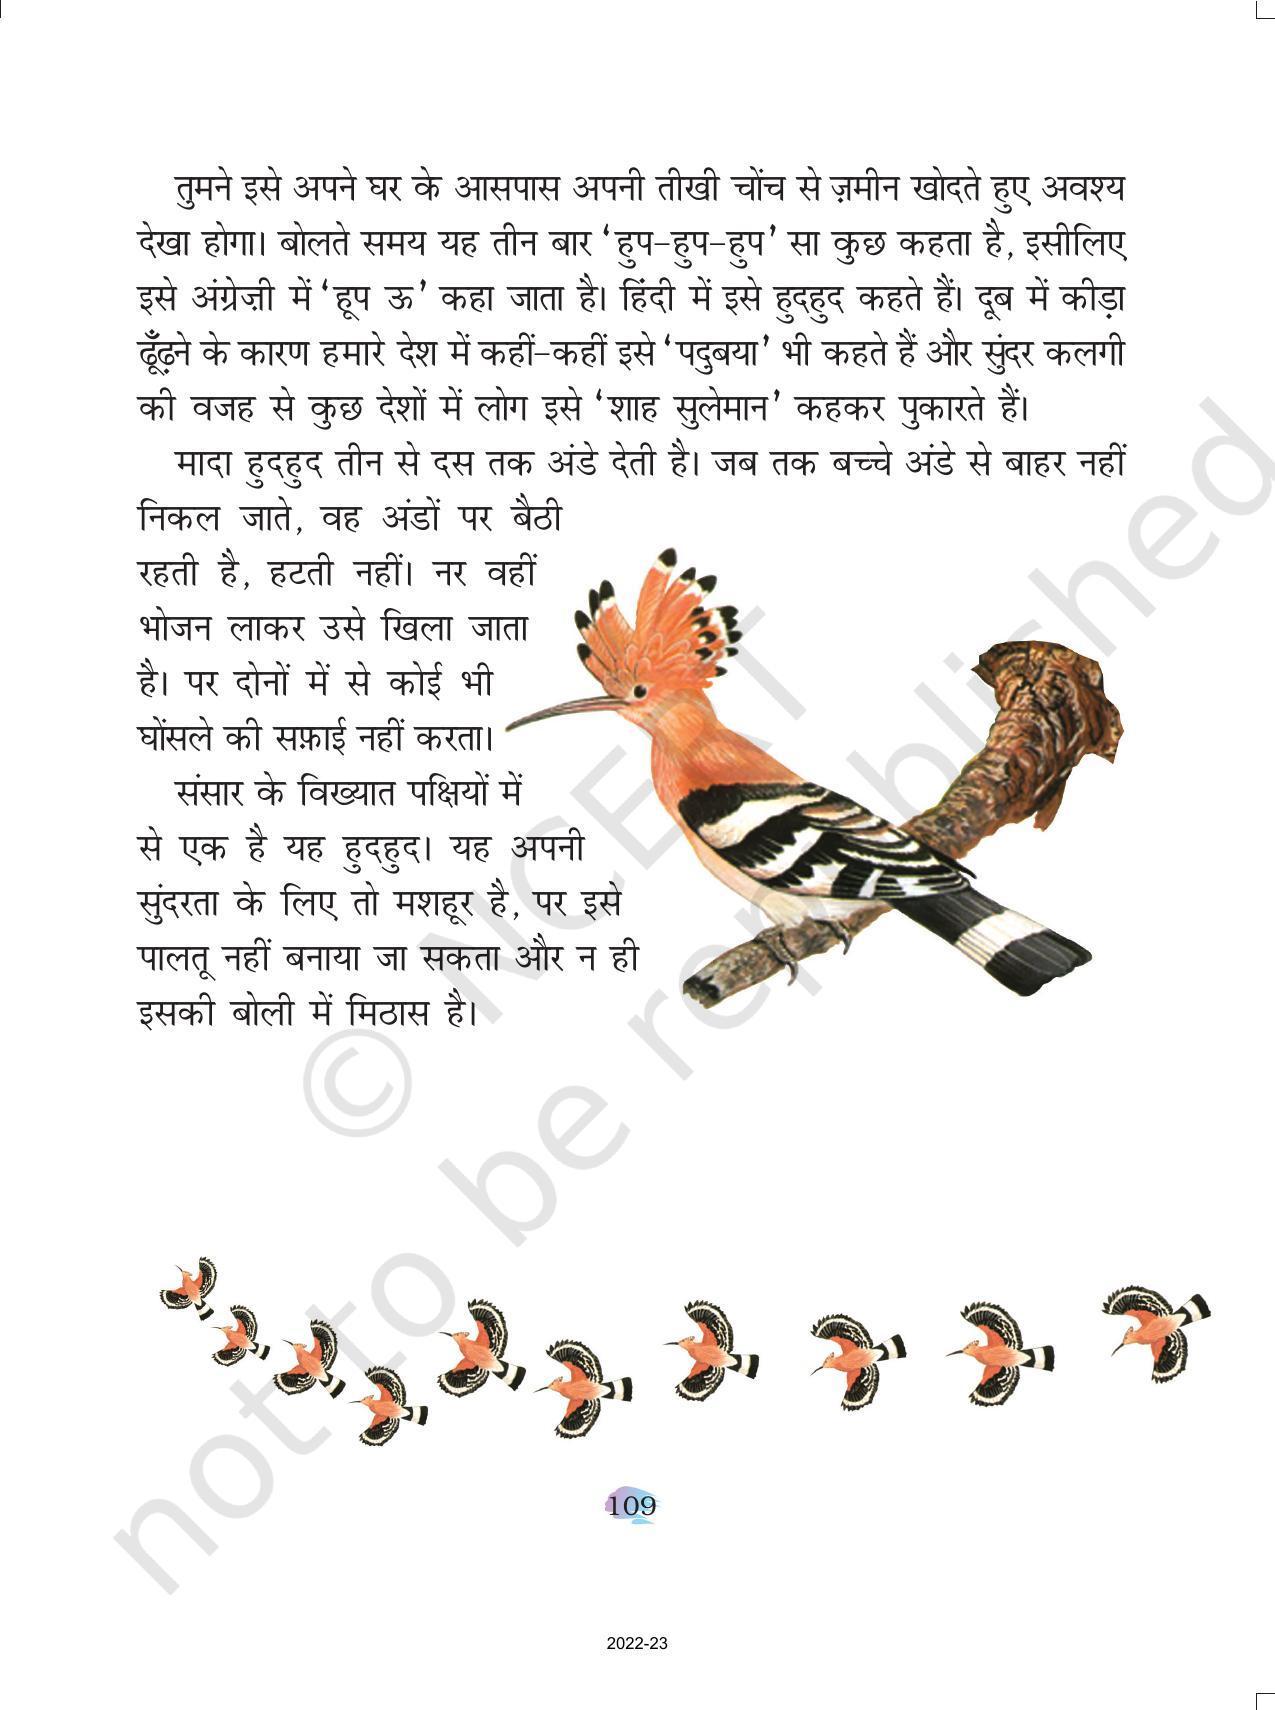 NCERT Book for Class 4 Hindi Chapter 13 हुदहुद - Page 4